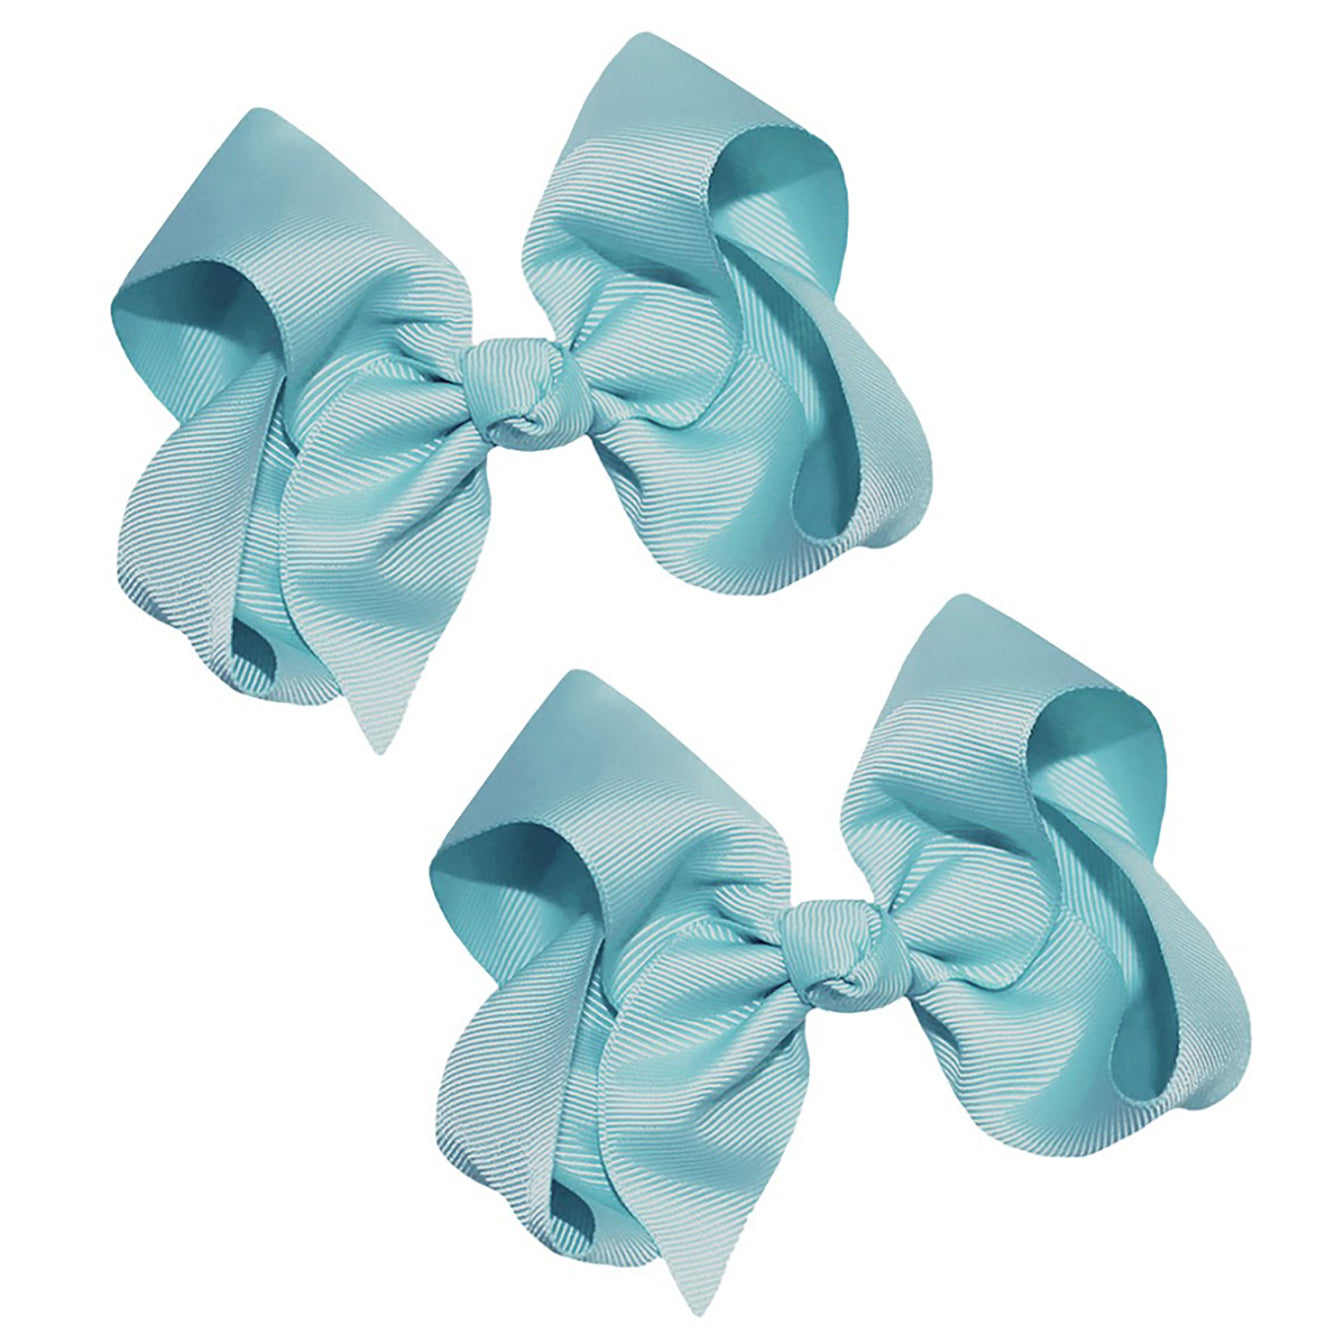 WD2U Girls Set of Two 4" Grosgrain Pigtail Hair Bows Alligator Clips